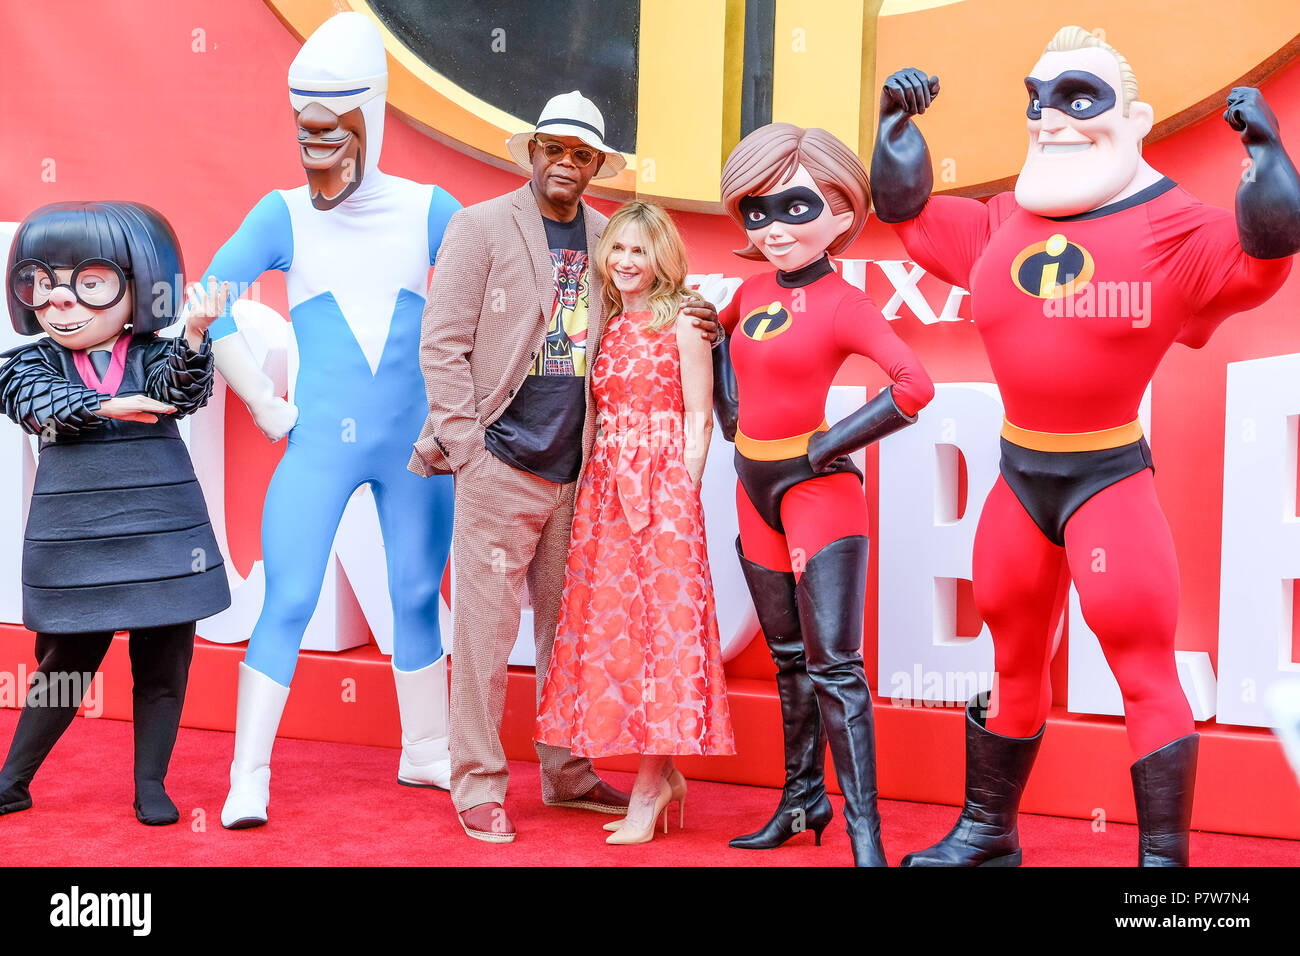 London, UK. 08th July, 2018. Samuel L. Jackson and Holly Hunter at UK premiere of Incredibles 2 on Sunday 8 July 2018 held at BFI Southbank, London. Pictured: Samuel L. Jackson, Holly Hunter. Stock Photo